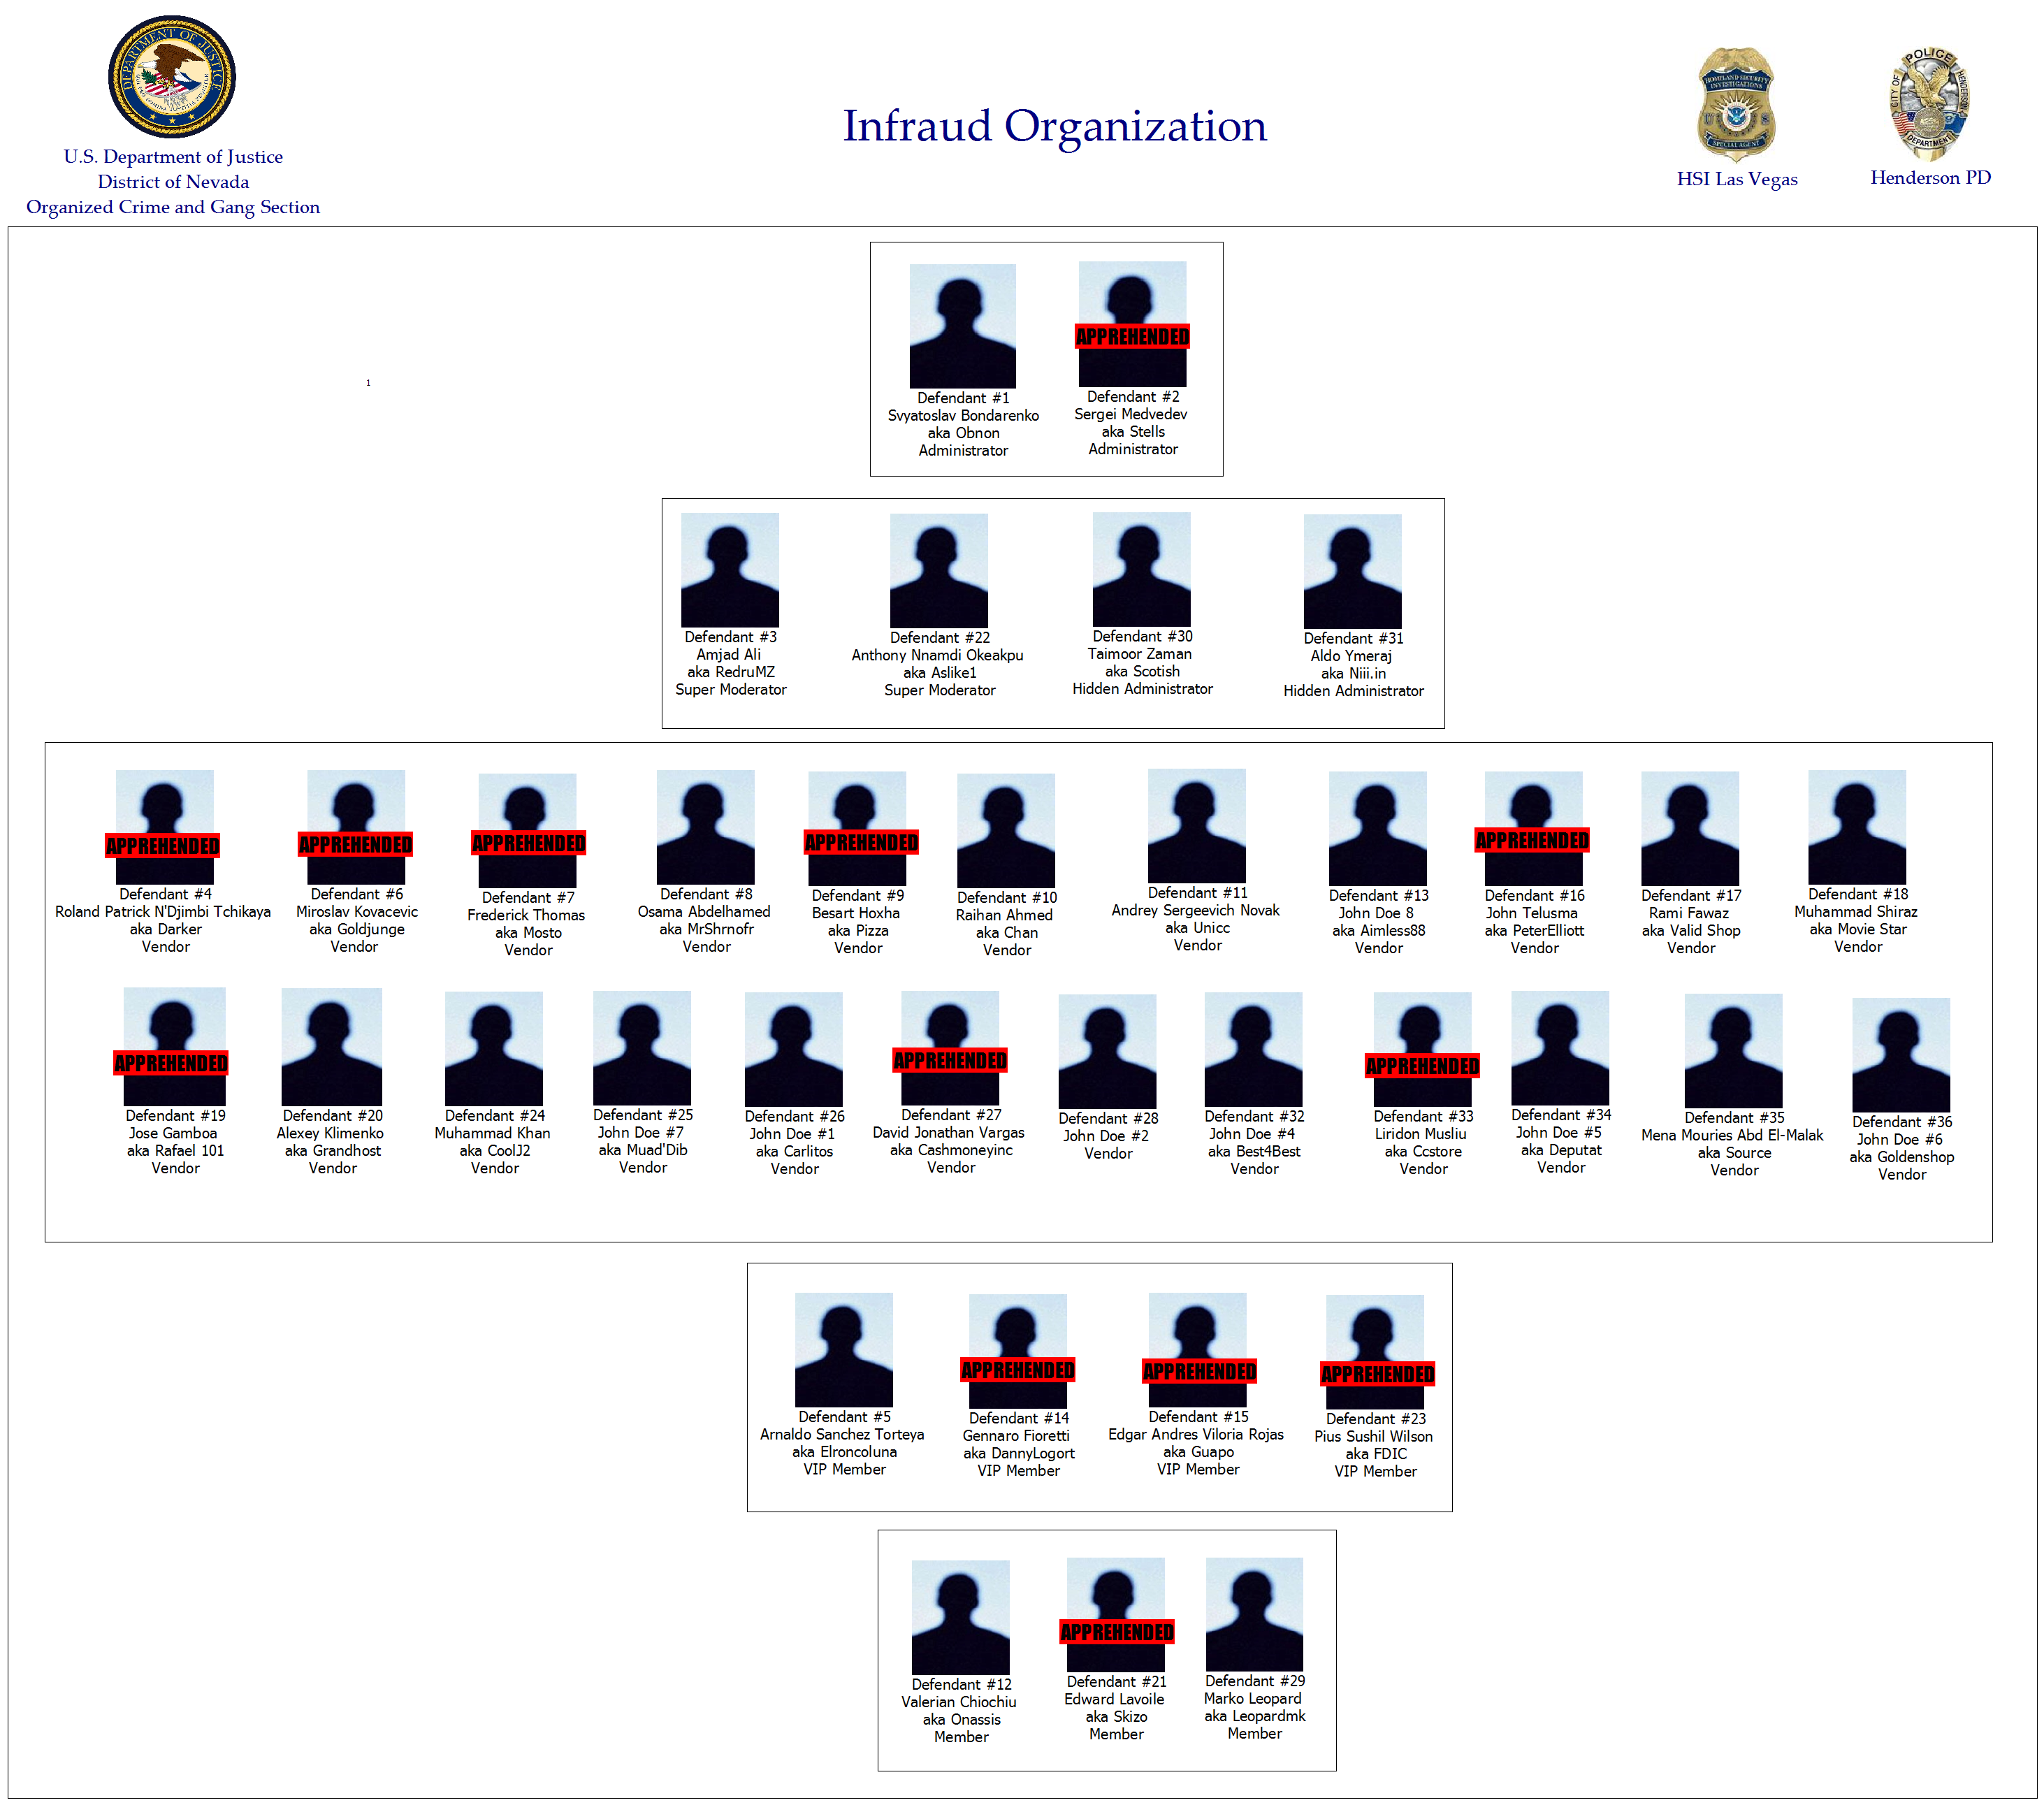 Despite titles like administrator or moderator, the DOJ's chart of the group’s hierarchy looks little different than those made to illuminate the structure of La Cosa Nostra families or other organized crime groups in the U.S. (Source: Department of Justice)